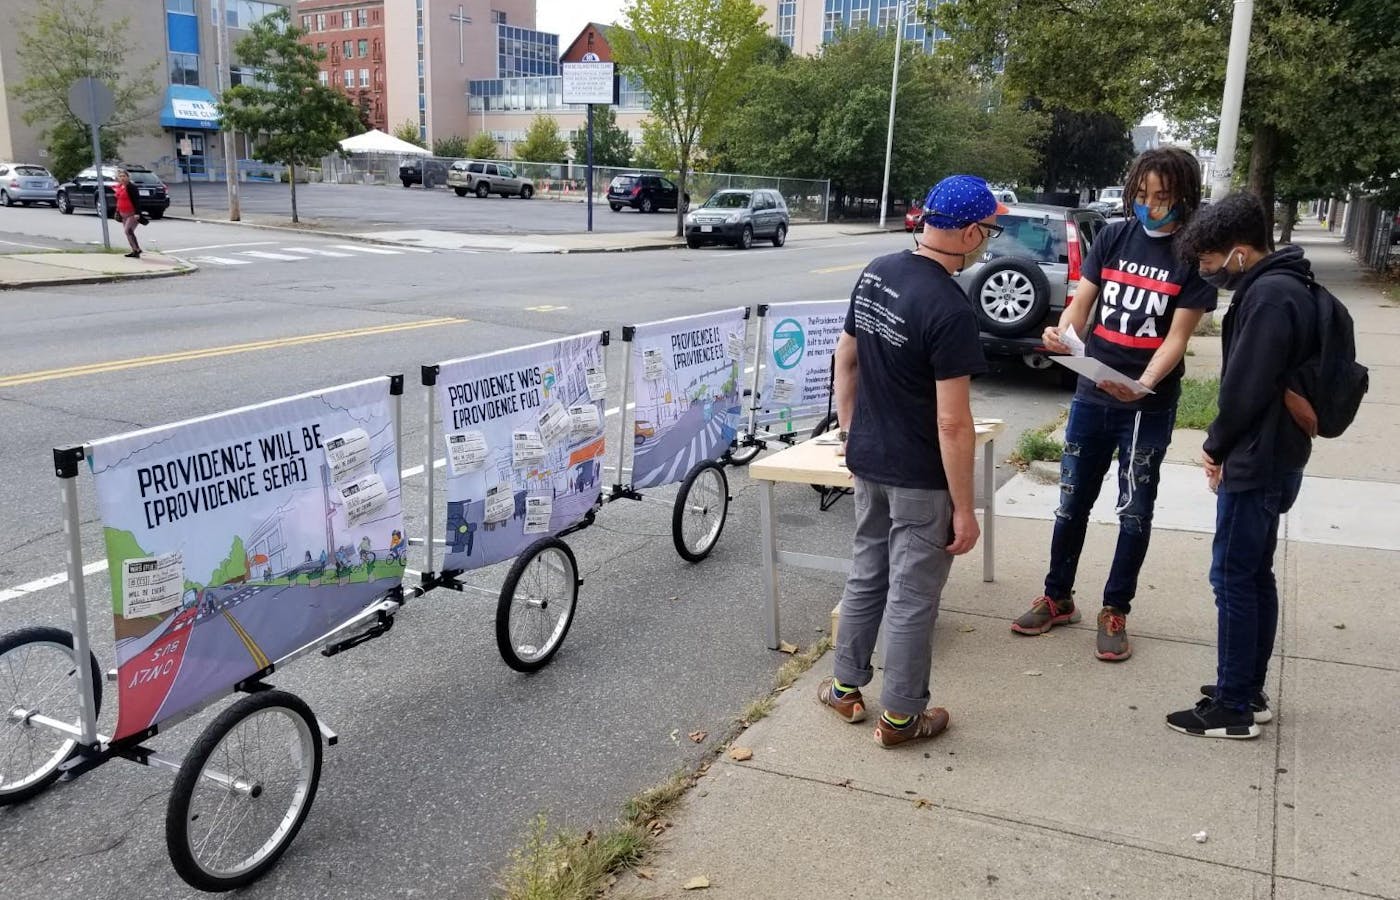 Alongside the nonprofit Youth in Action, the Providence Streets Coalition has been engaging residents on Broad Street around the city’s planned infrastructure changes.